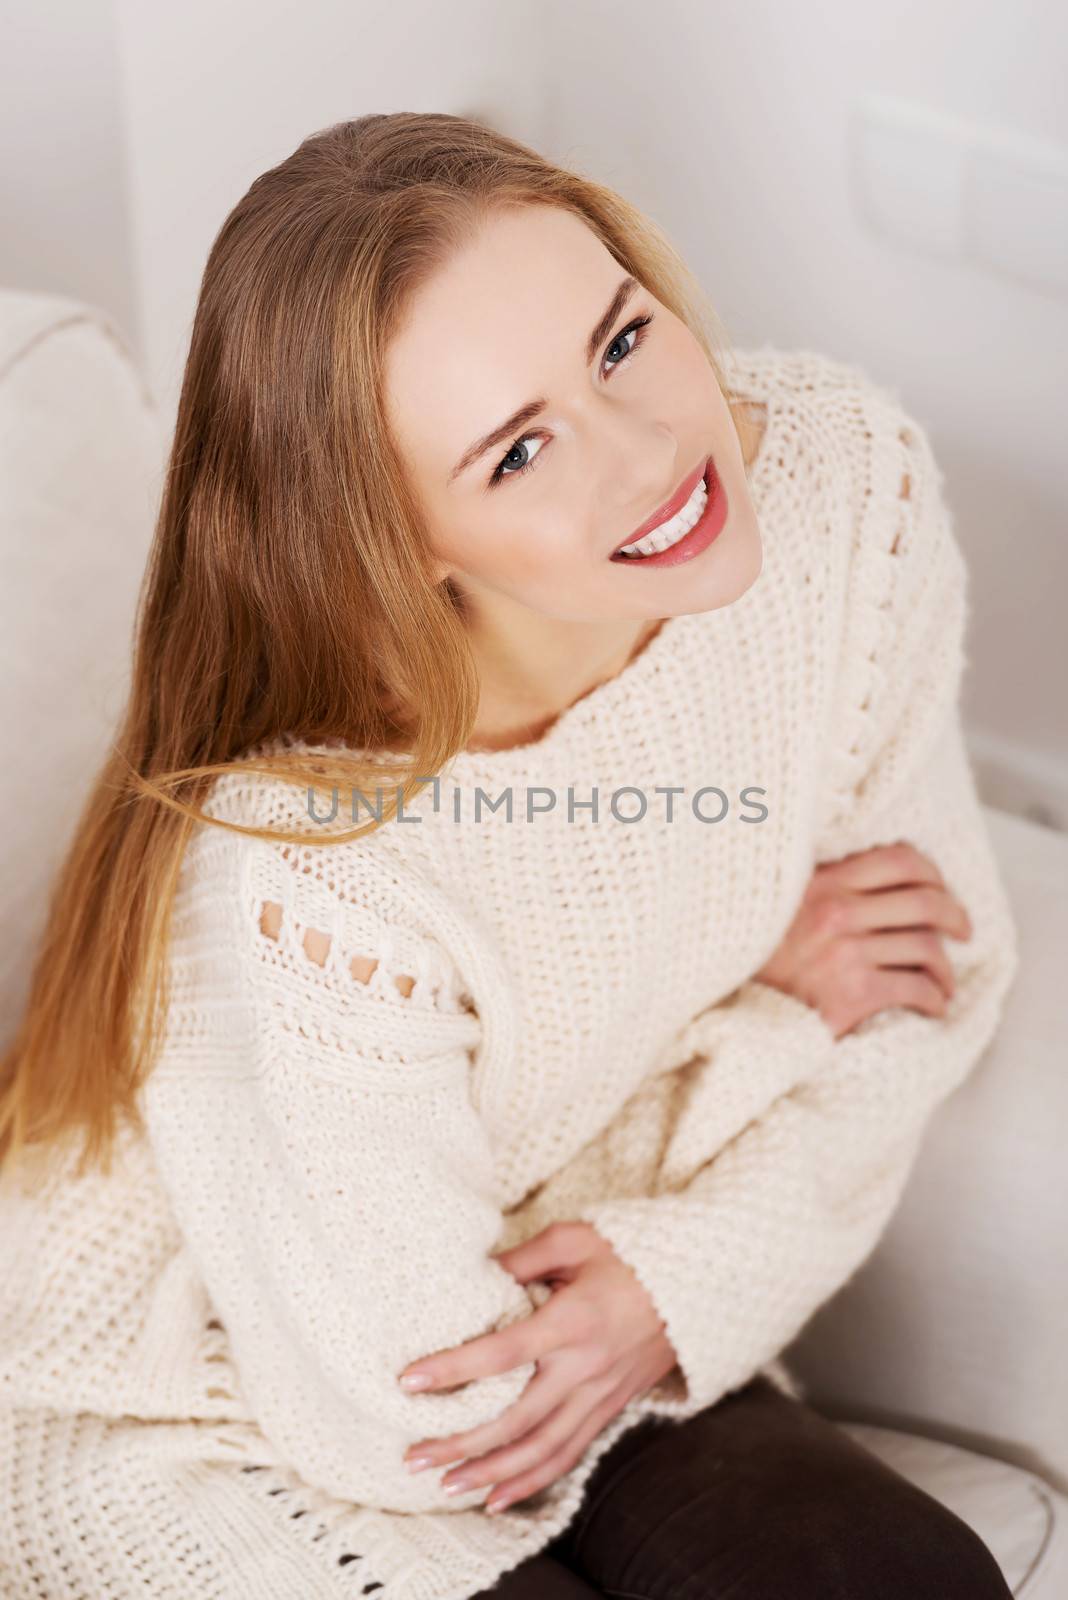 Beautiful woman in bright sweater sitting on a couch and smiling.